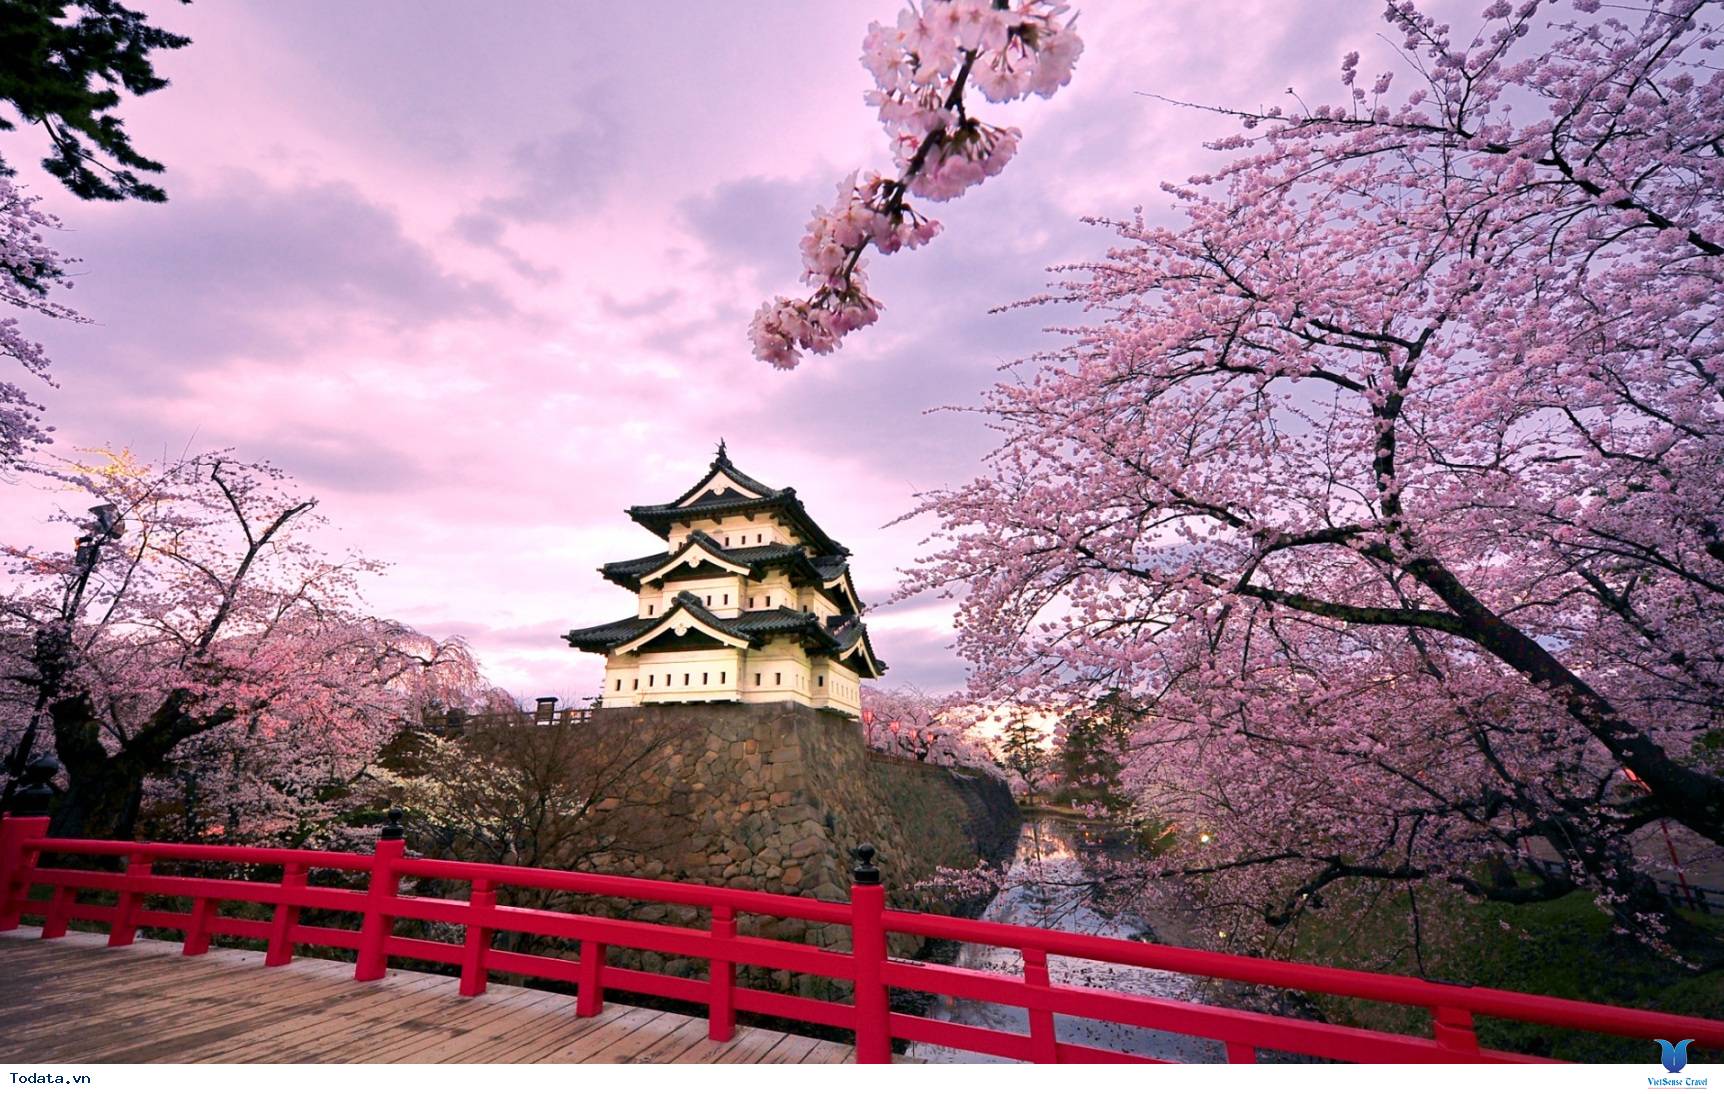 Suggest 8 most beautiful cherry blossom viewing spots in Japan